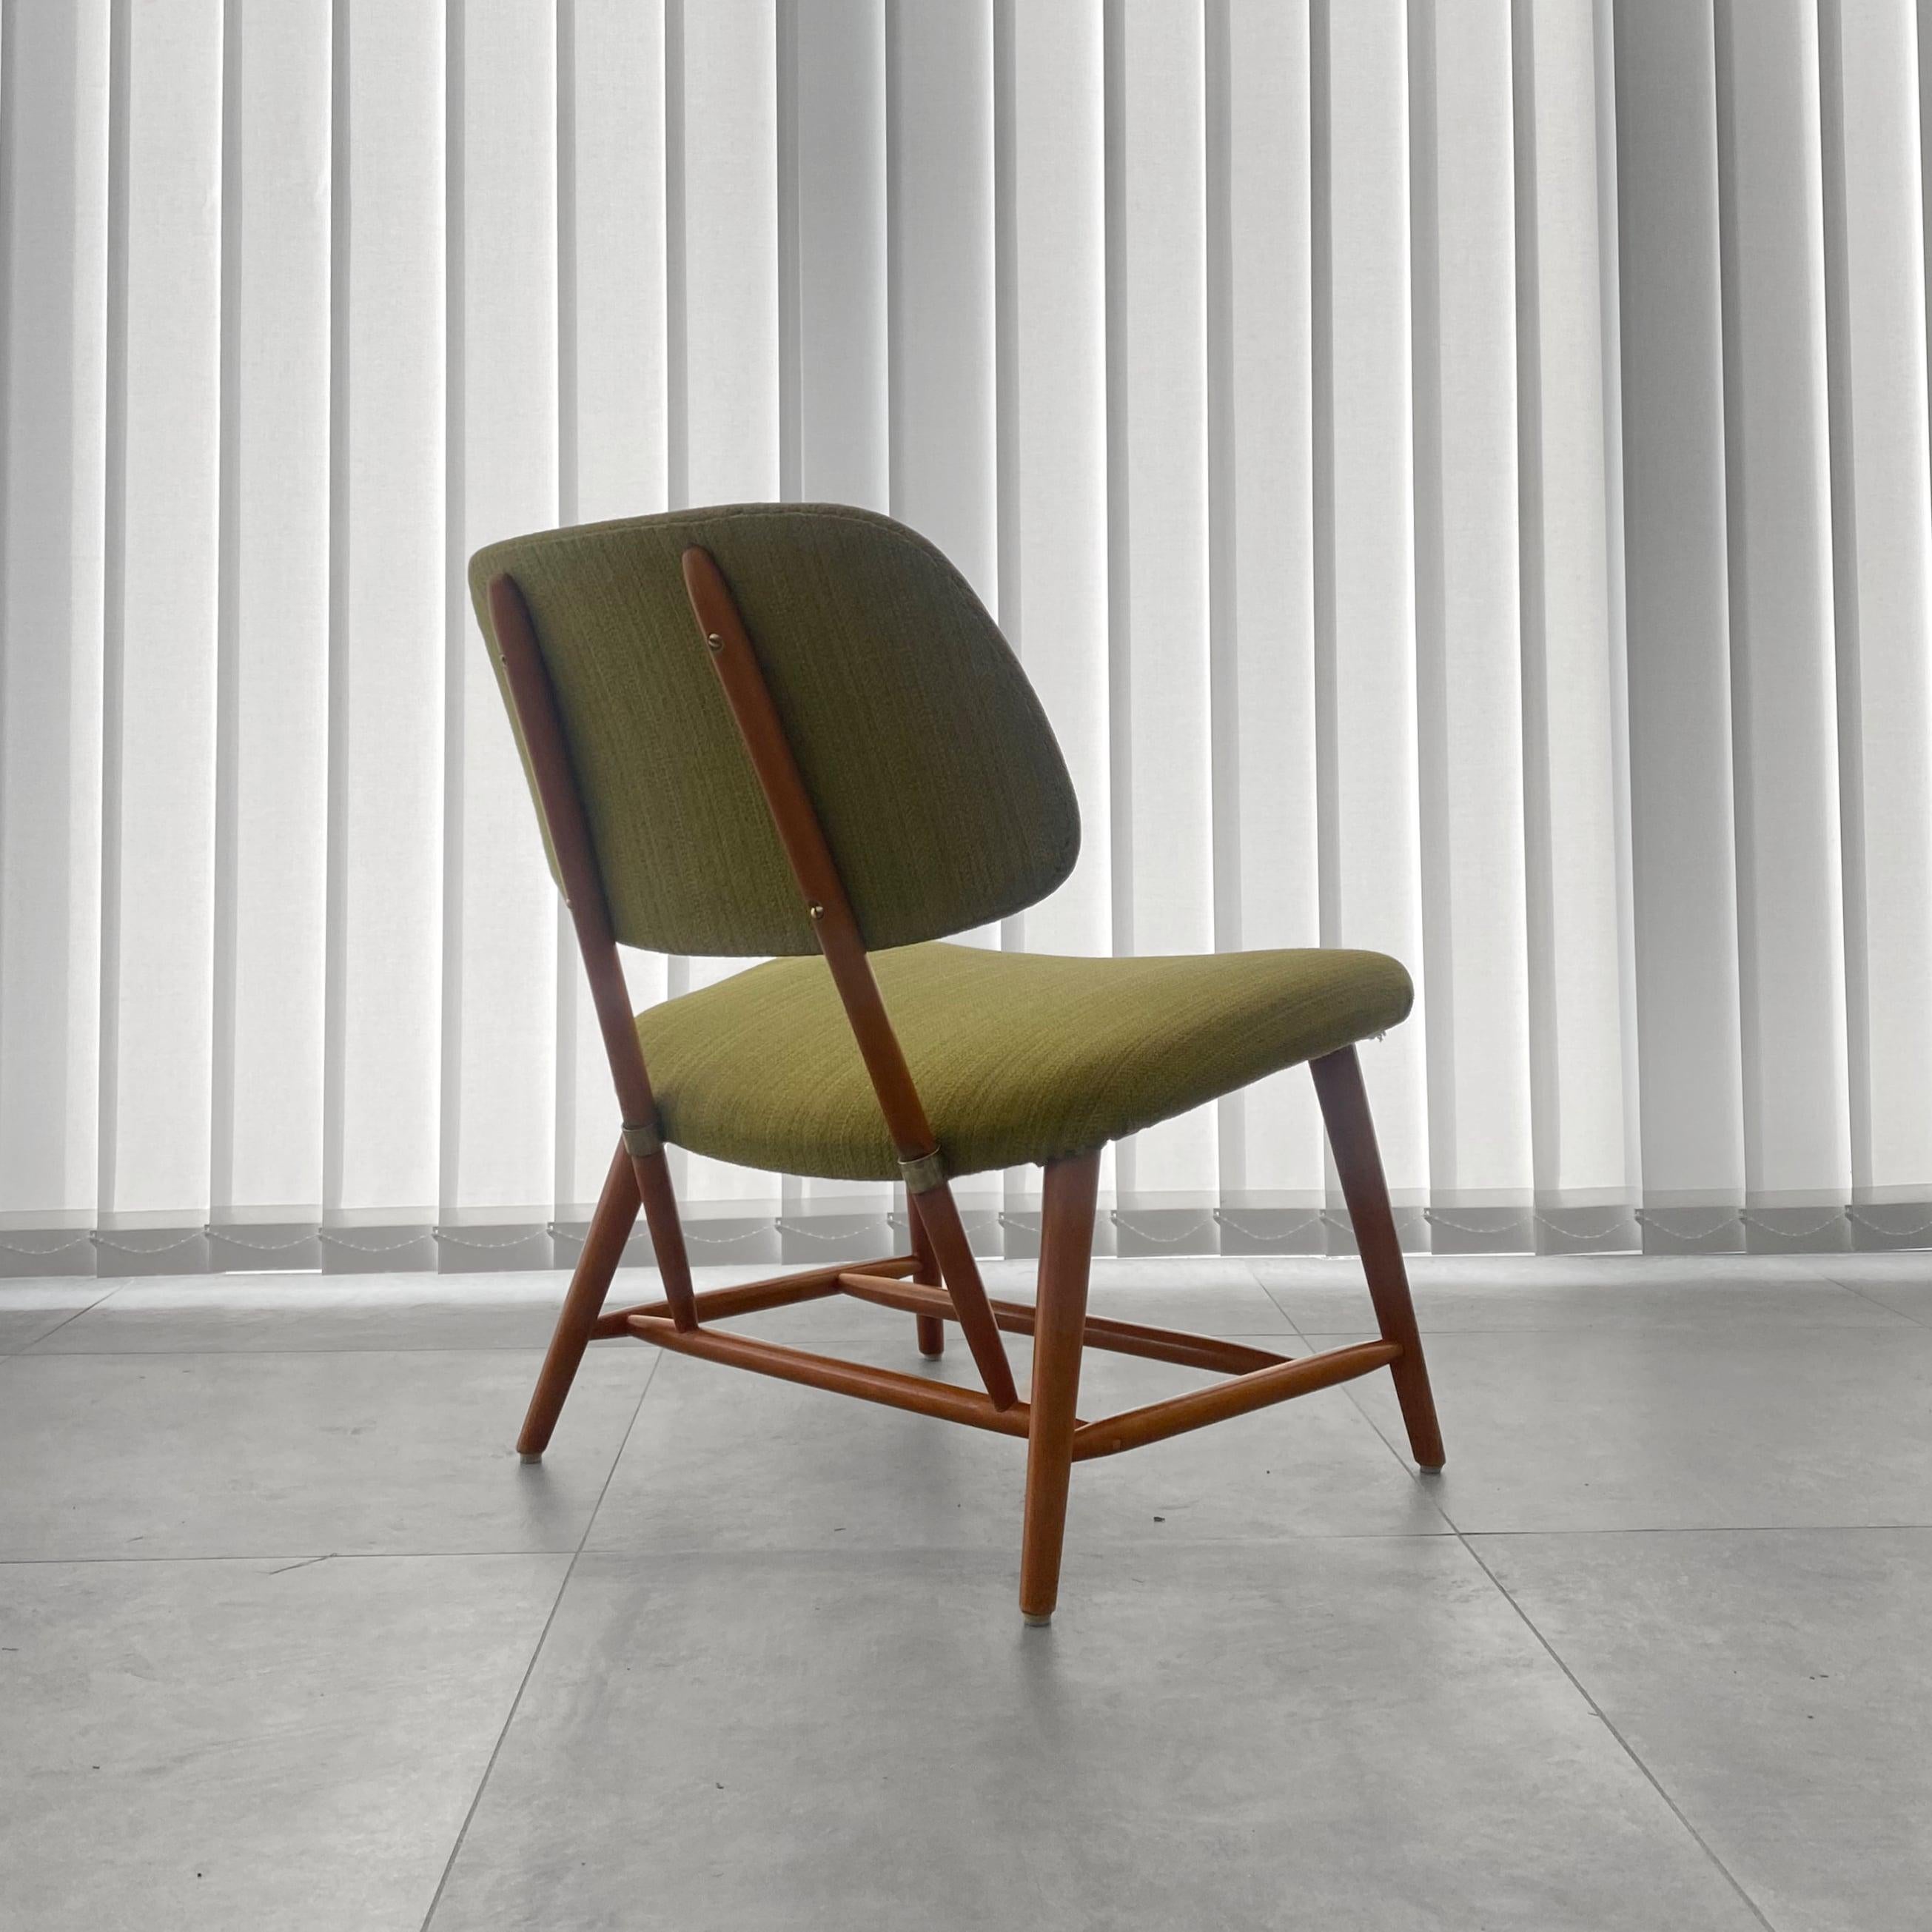 A TeVe lounge chair, designed by the Swedish architect Alf Svensson in 1953 for the manufacturer Ljungs Industrier (Dux). Crafted from solid beech with brass details and featuring original textile upholstery in a soft shade of green. This unusually